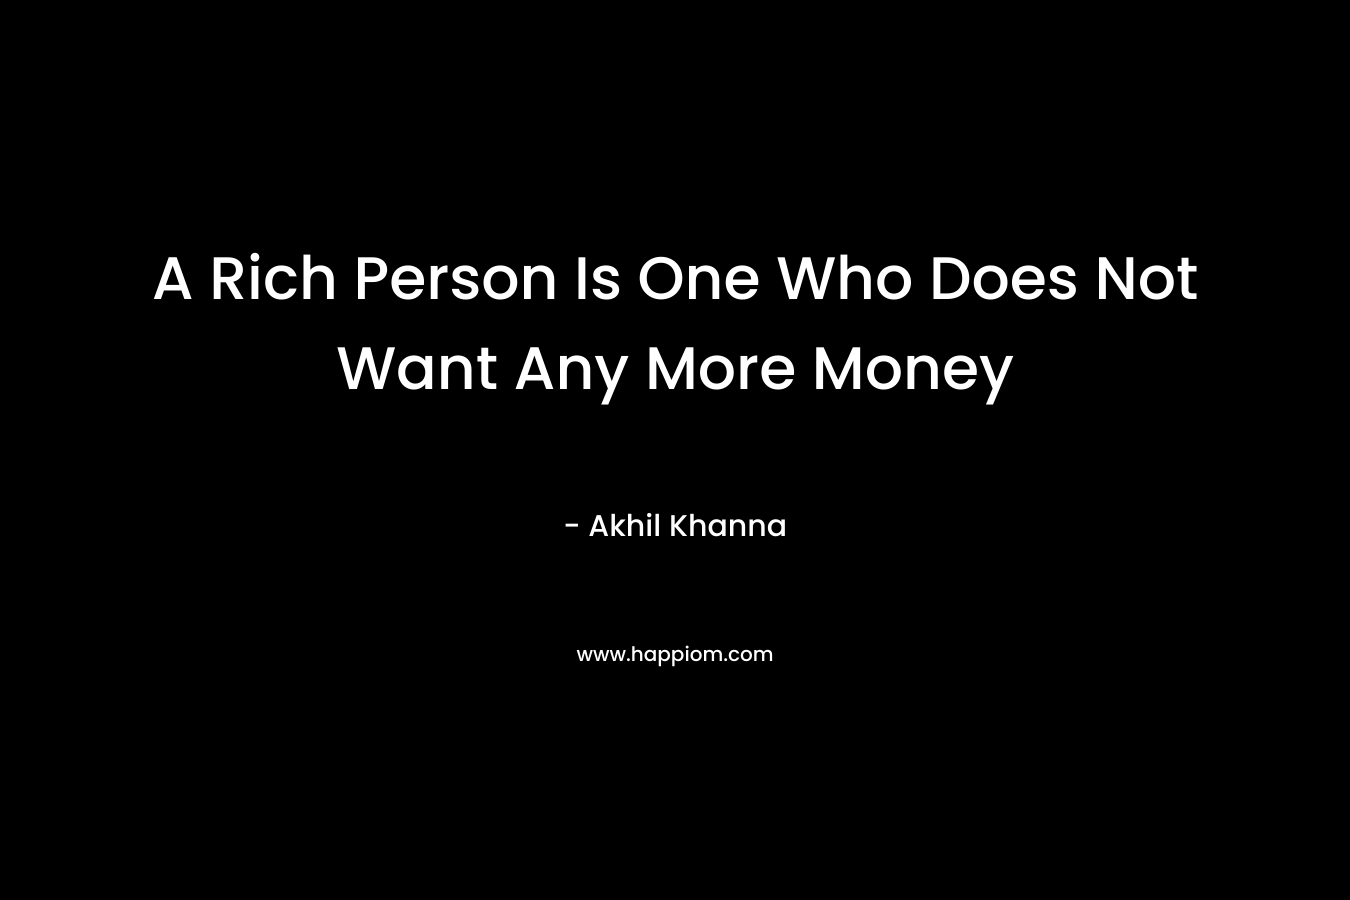 A Rich Person Is One Who Does Not Want Any More Money